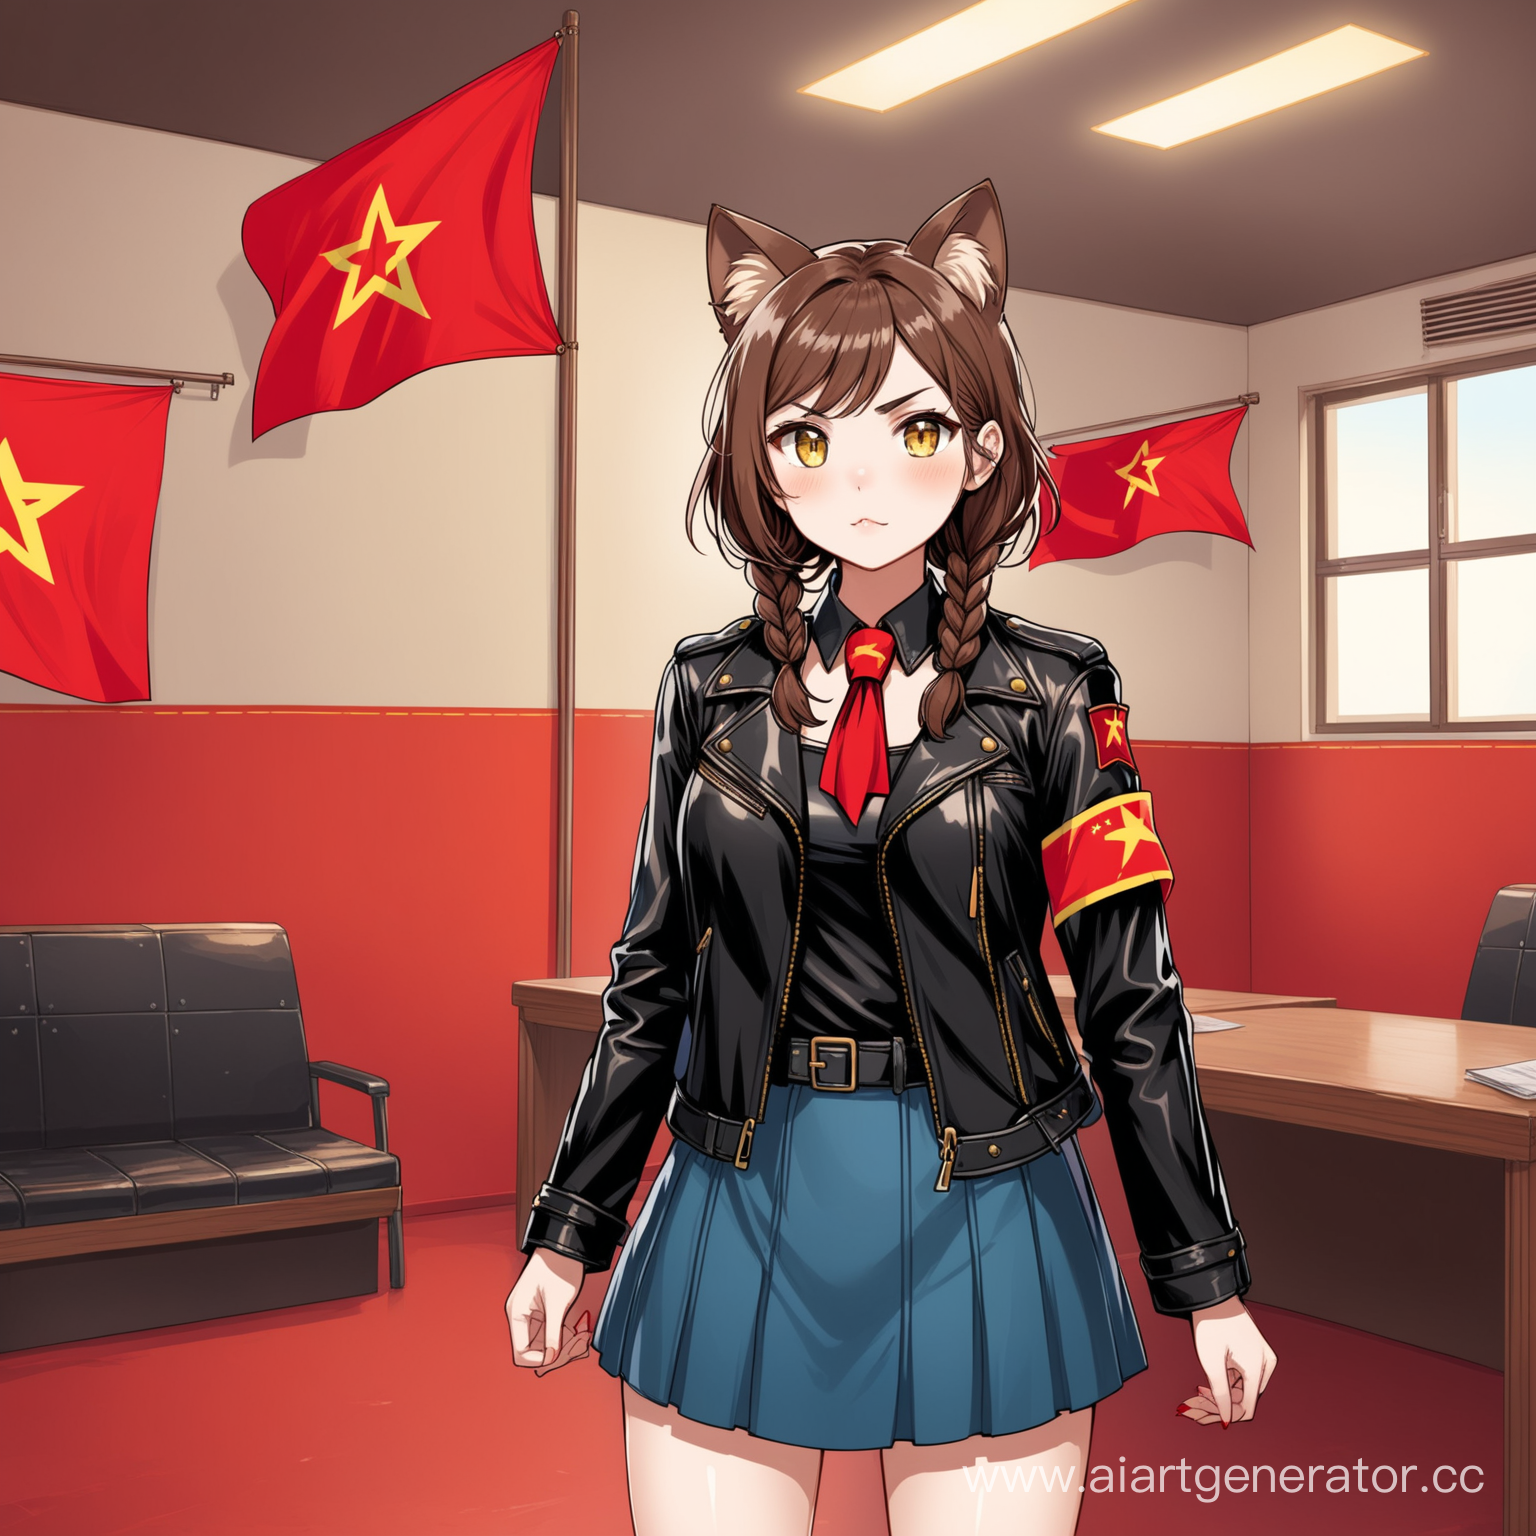 Catgirl yellow eyes brown hair (one short braid), brown cat ears, short blue skirt, black leather jacket with red armband.  Communist squad Communist room with red communist flags